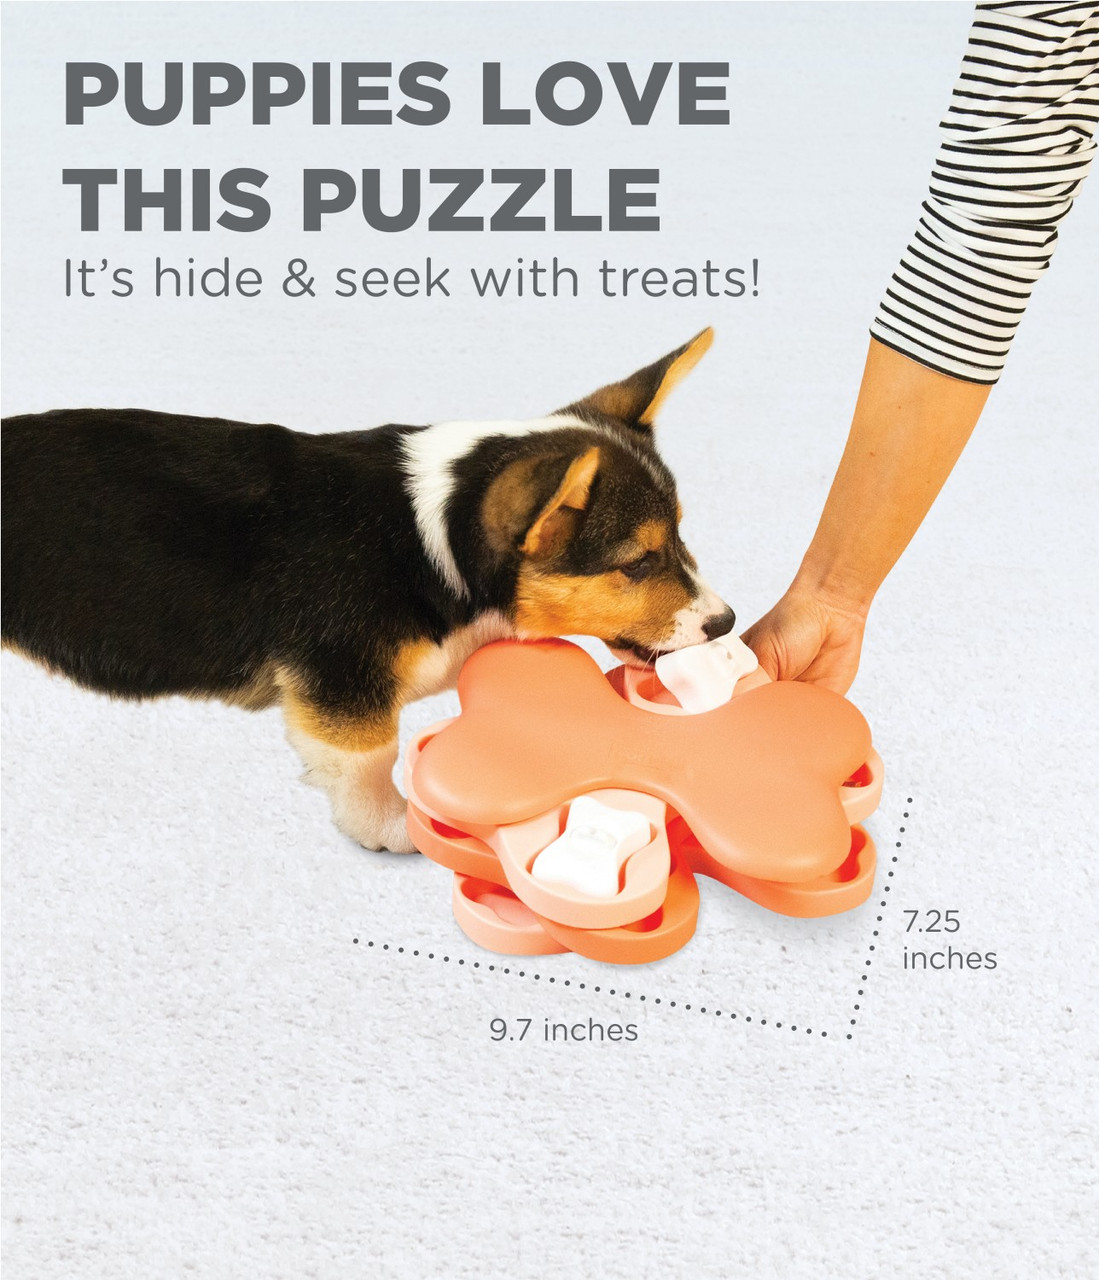 Dog Tornado Puzzle – Dogs Dig It